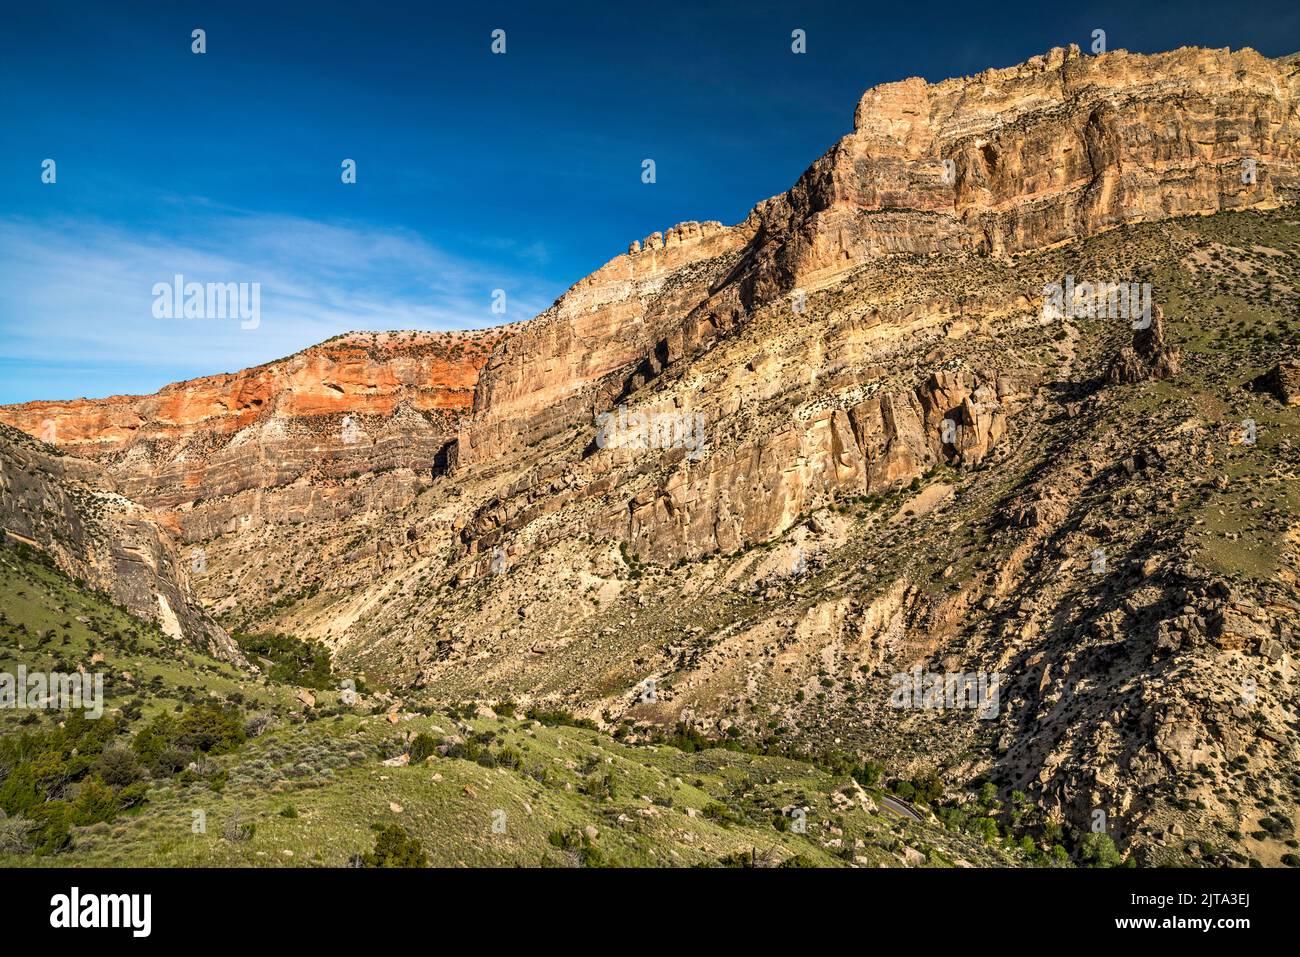 Cliffs over Shell Canyon, Bighorn Scenic Byway (Highway US-14), near Post Creek picnic area, early morning, Bighorn Mountains, Wyoming, USA Stock Photo